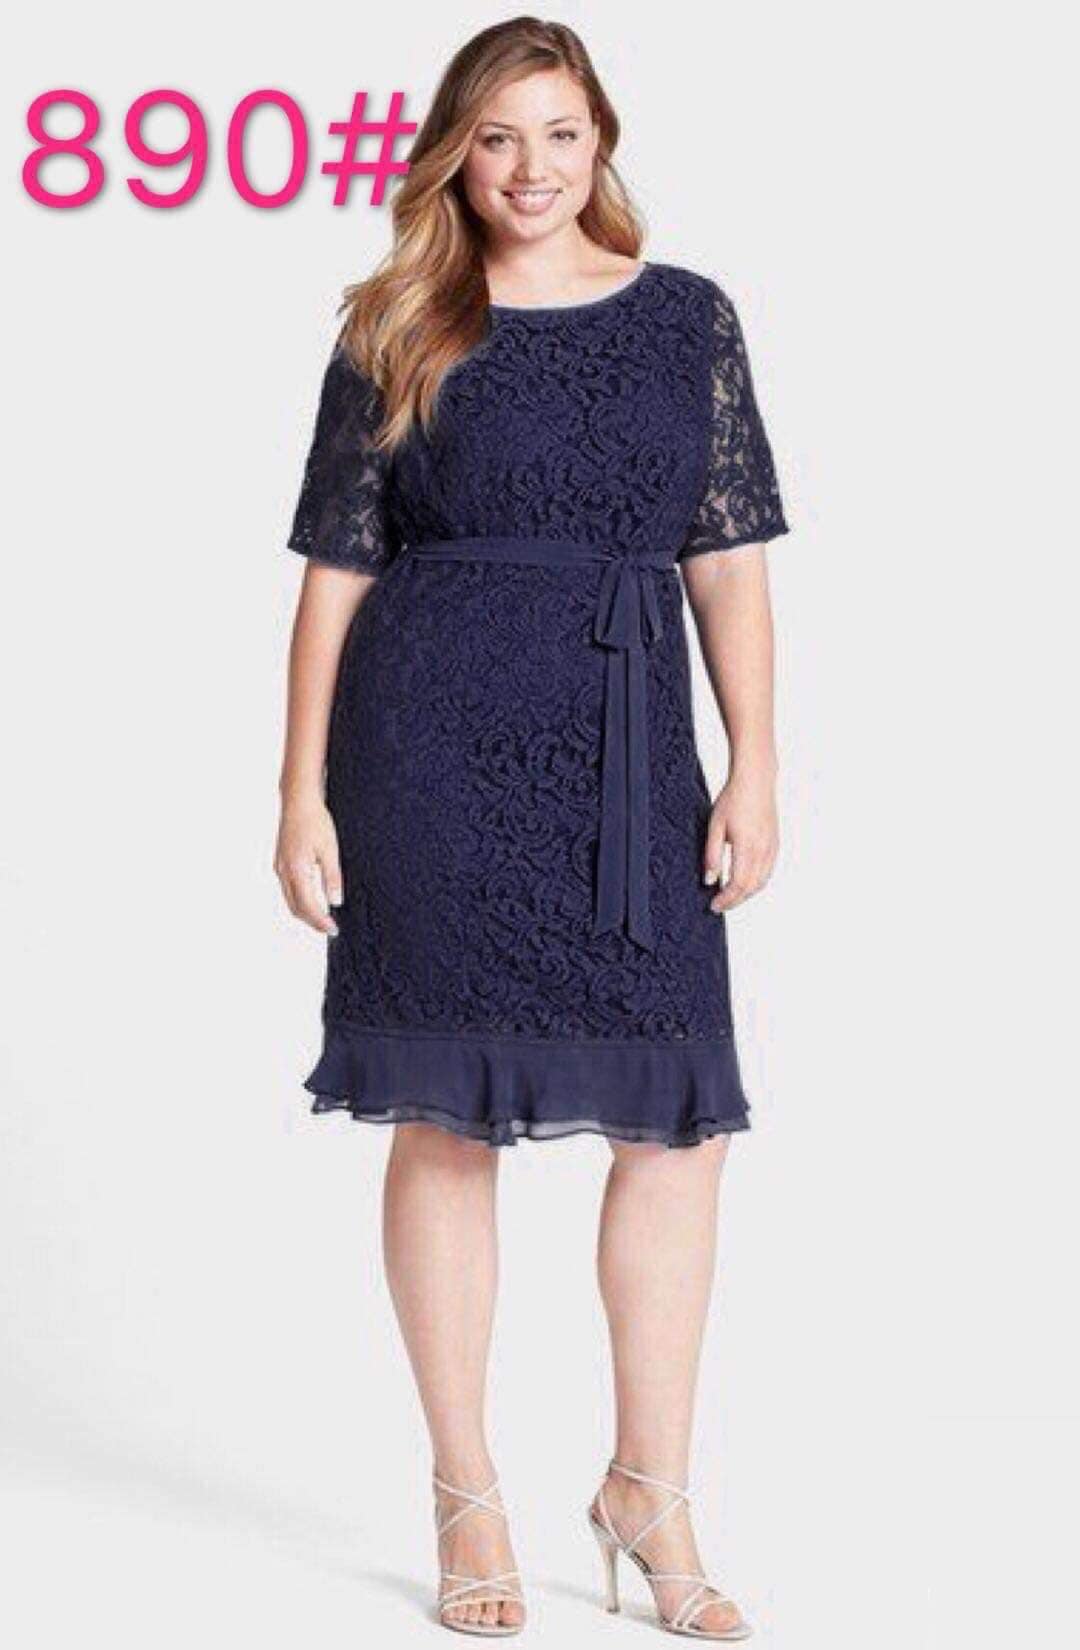 Women Lace V Neck Plus Size Cocktail Dress Navy Blue Wedding Guest  Semi-Formal Evening Party Casual Knee Length Dresses 